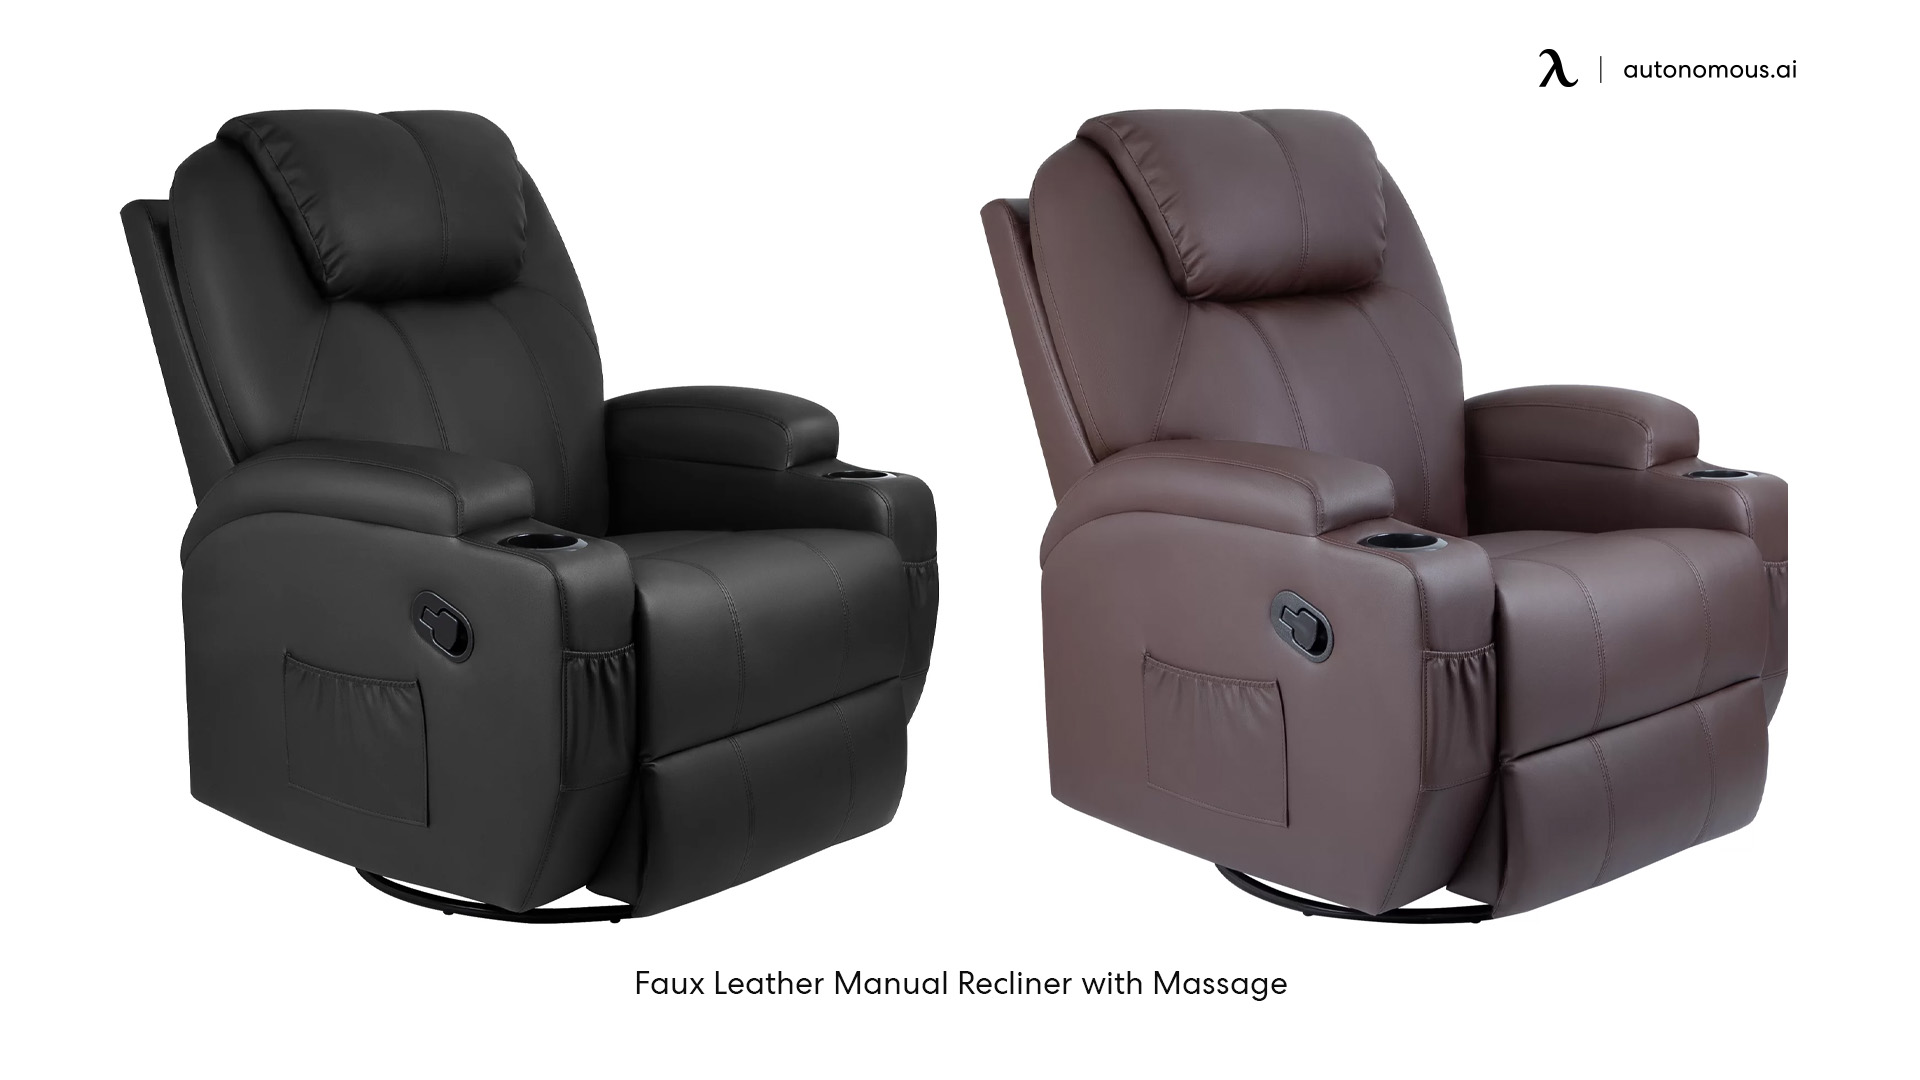 Faux Leather Manual Recliner with Massage